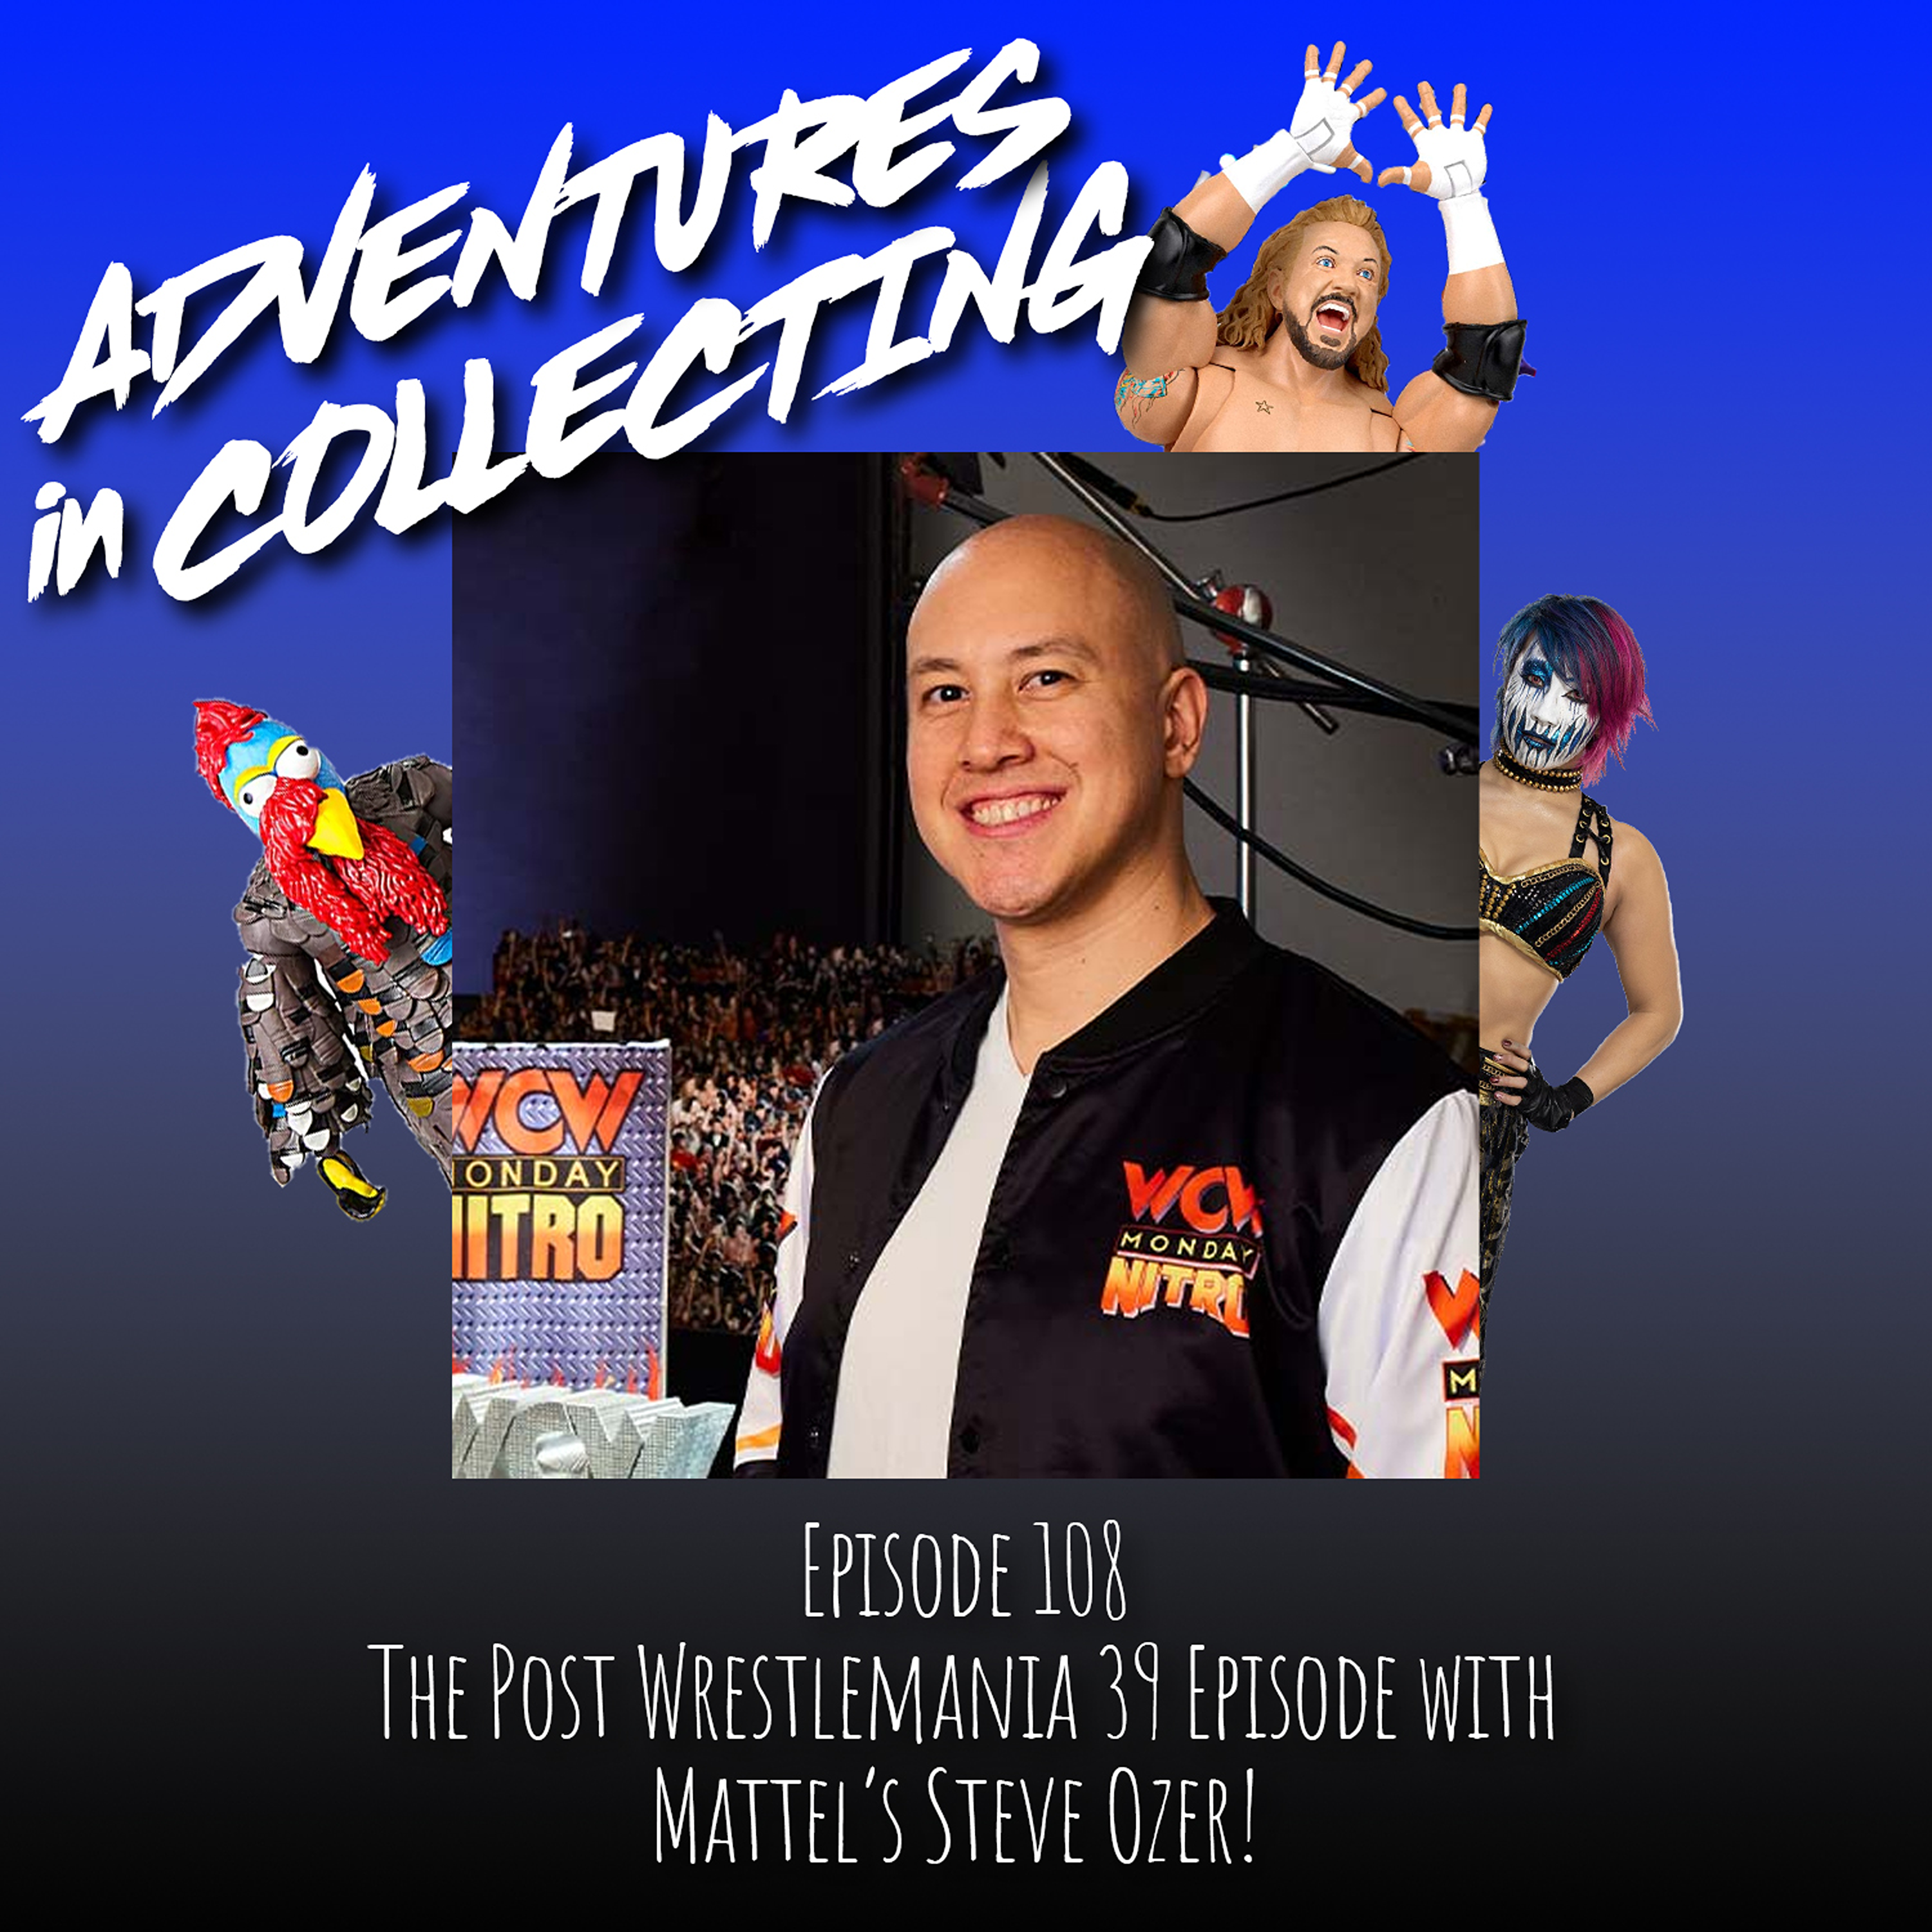 The Post Wrestlemania 39 Episode with Mattel’s Steve Ozer